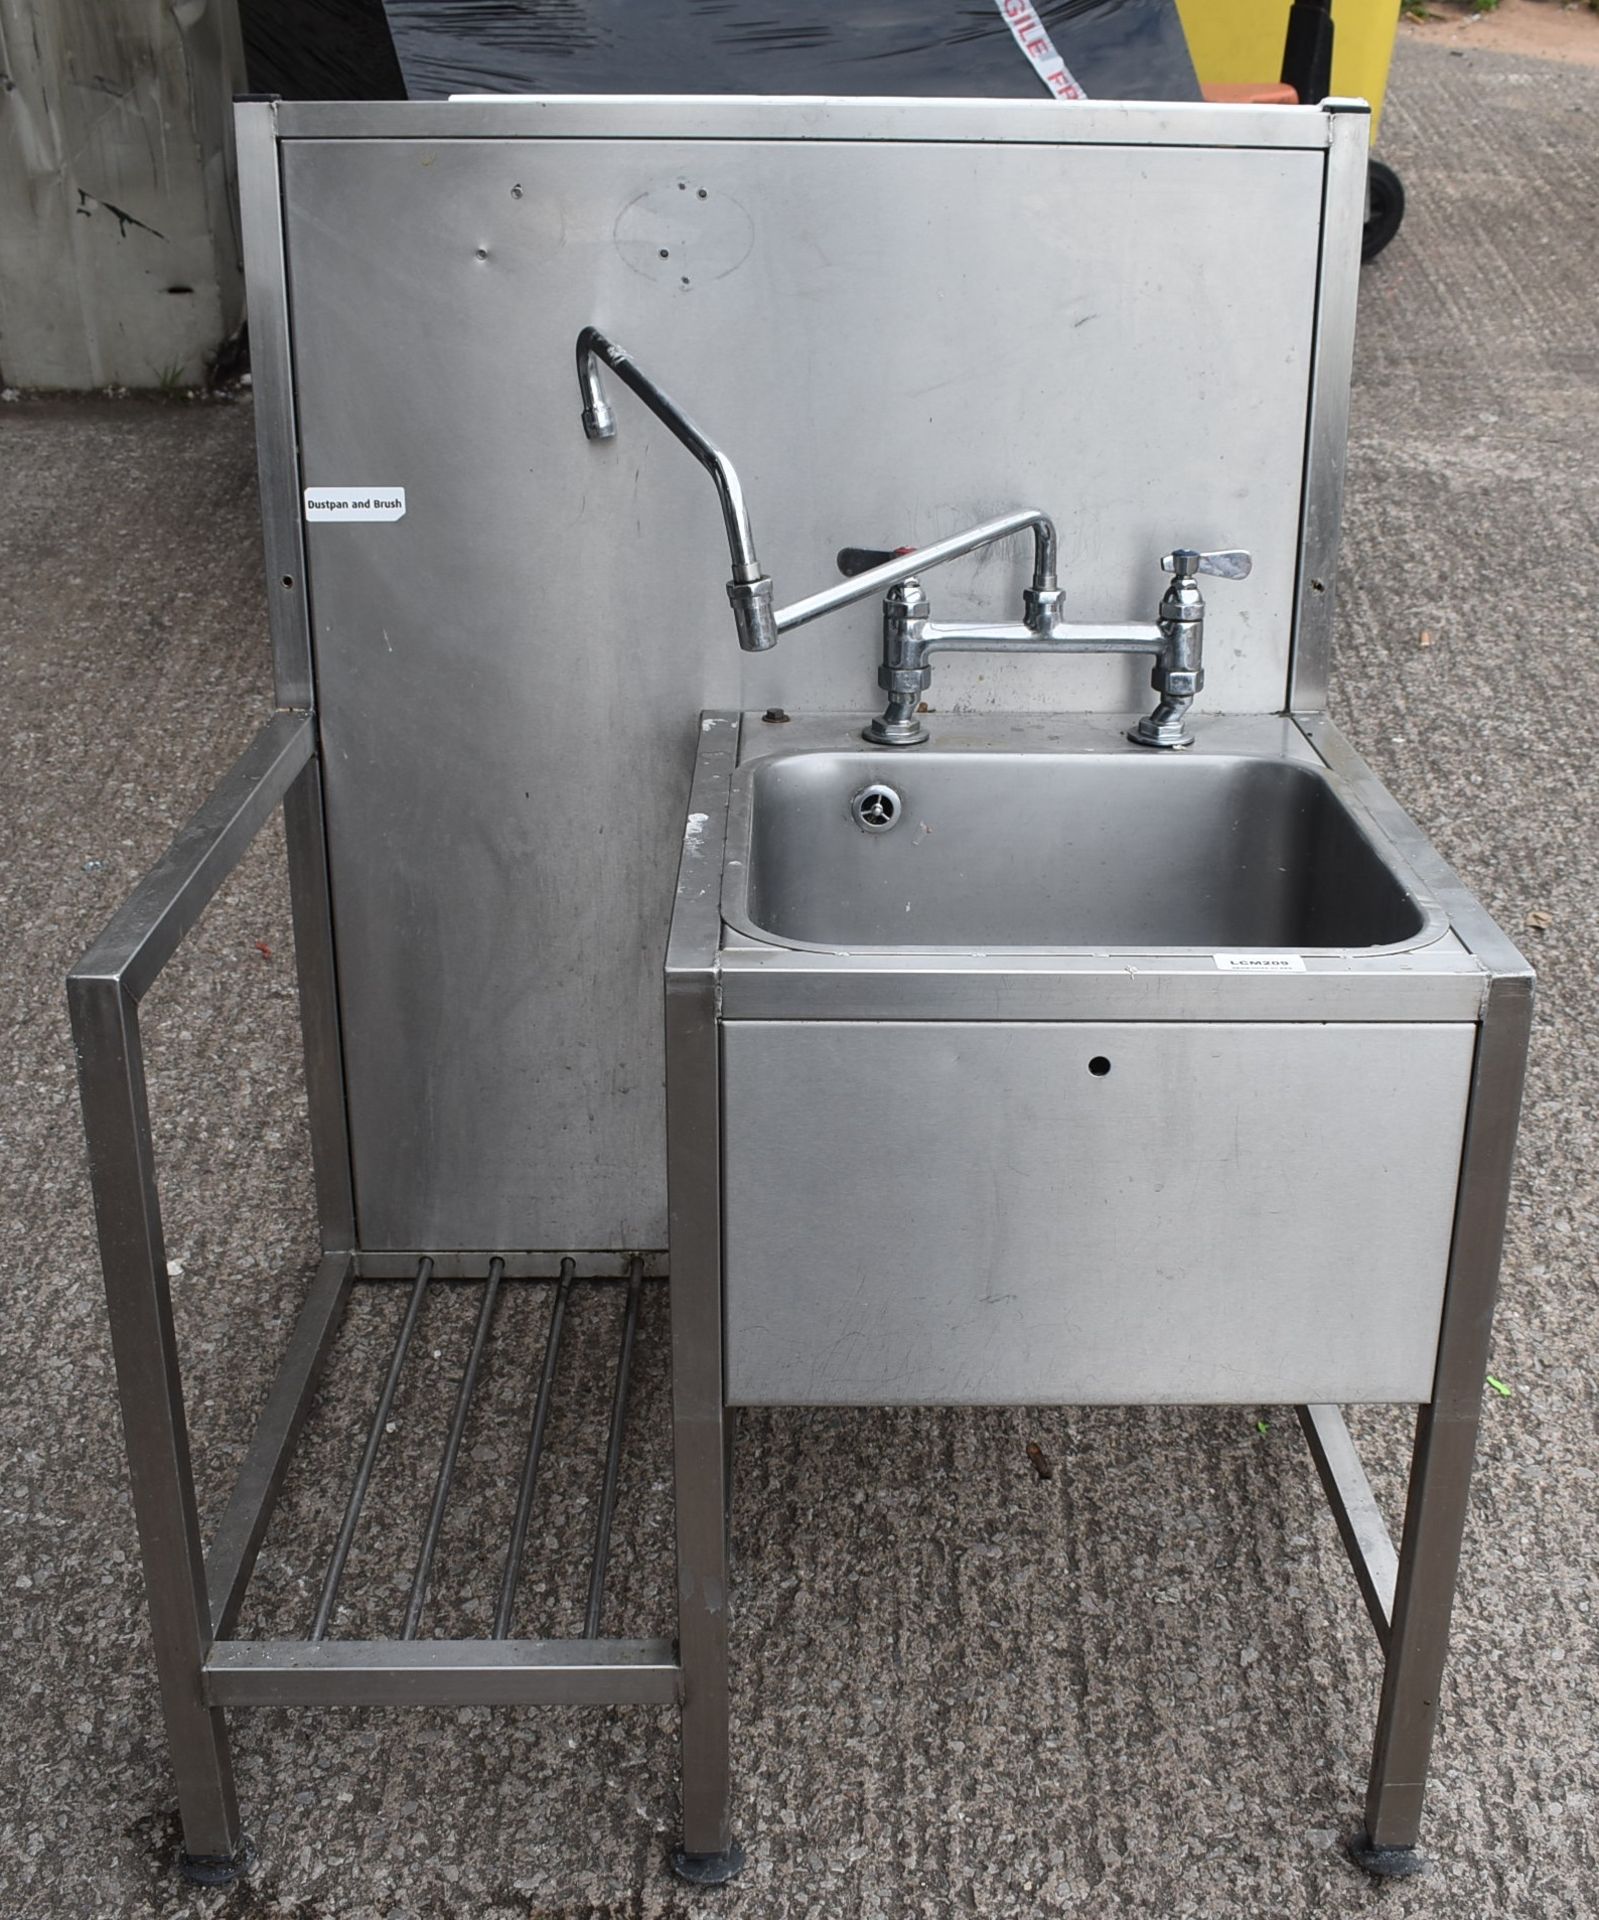 1 x Stainless Steel Janitorial Wash Station With Splashback and Mixer Tap - Recently Removed From